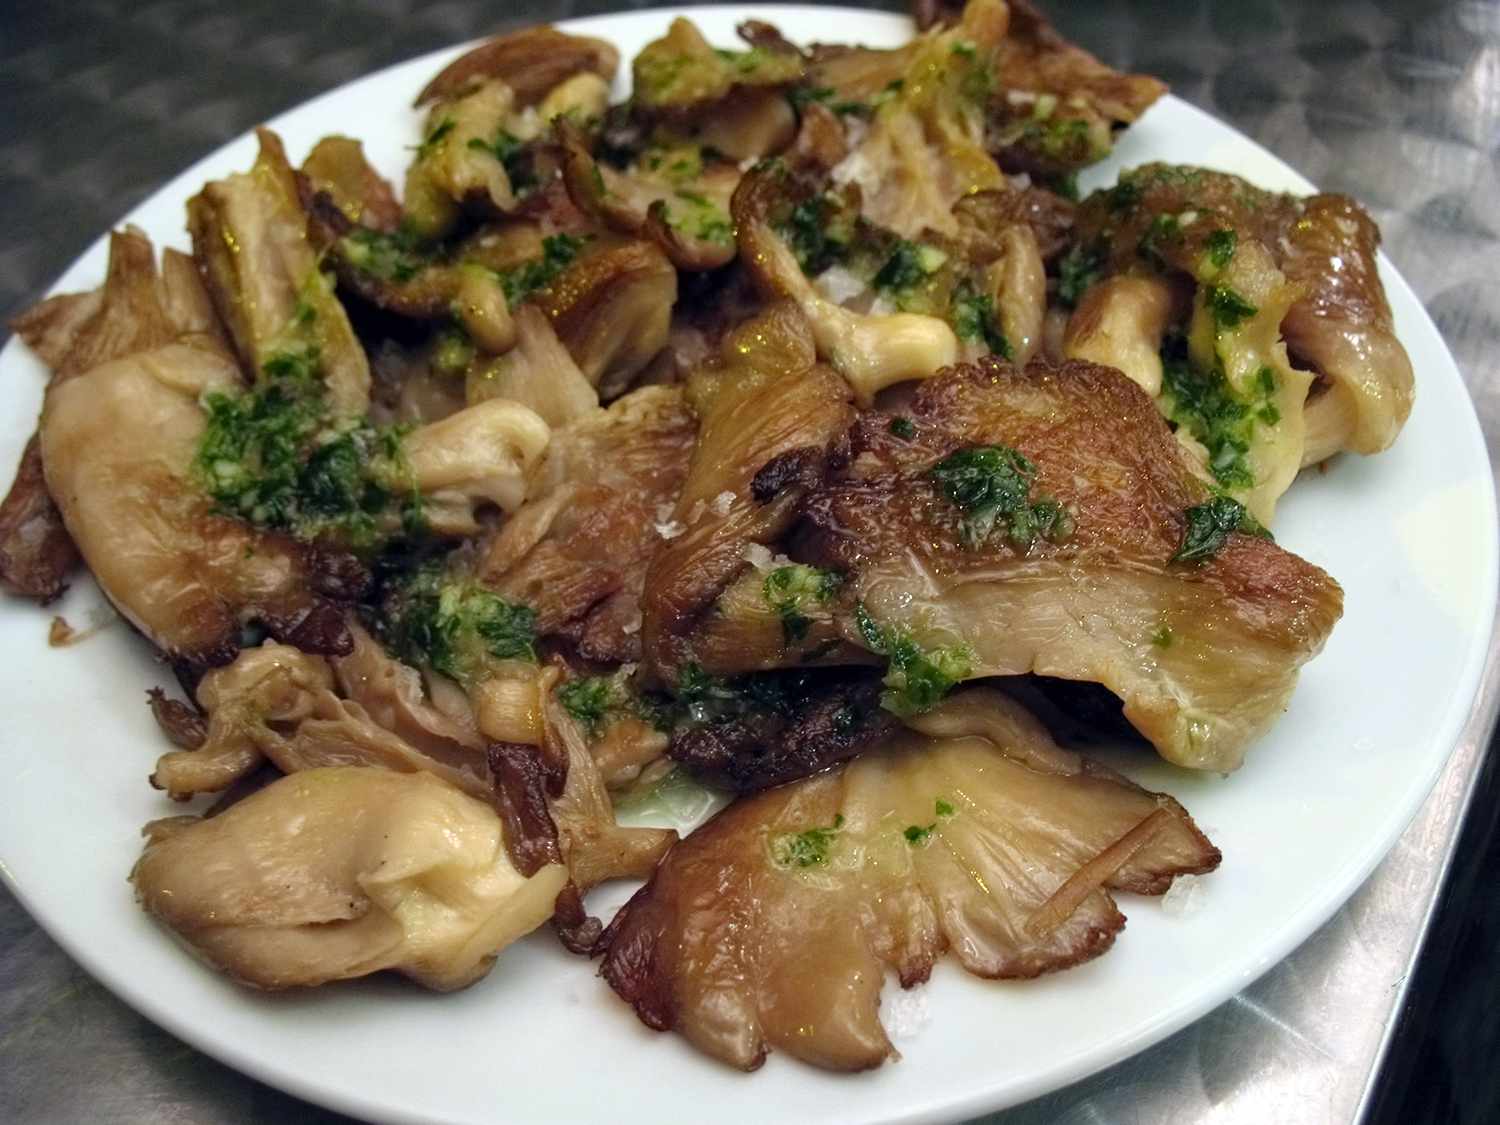 Tapas of pan-fried oyster mushrooms with salsa verde on a white plate on a stainless steel tabletop